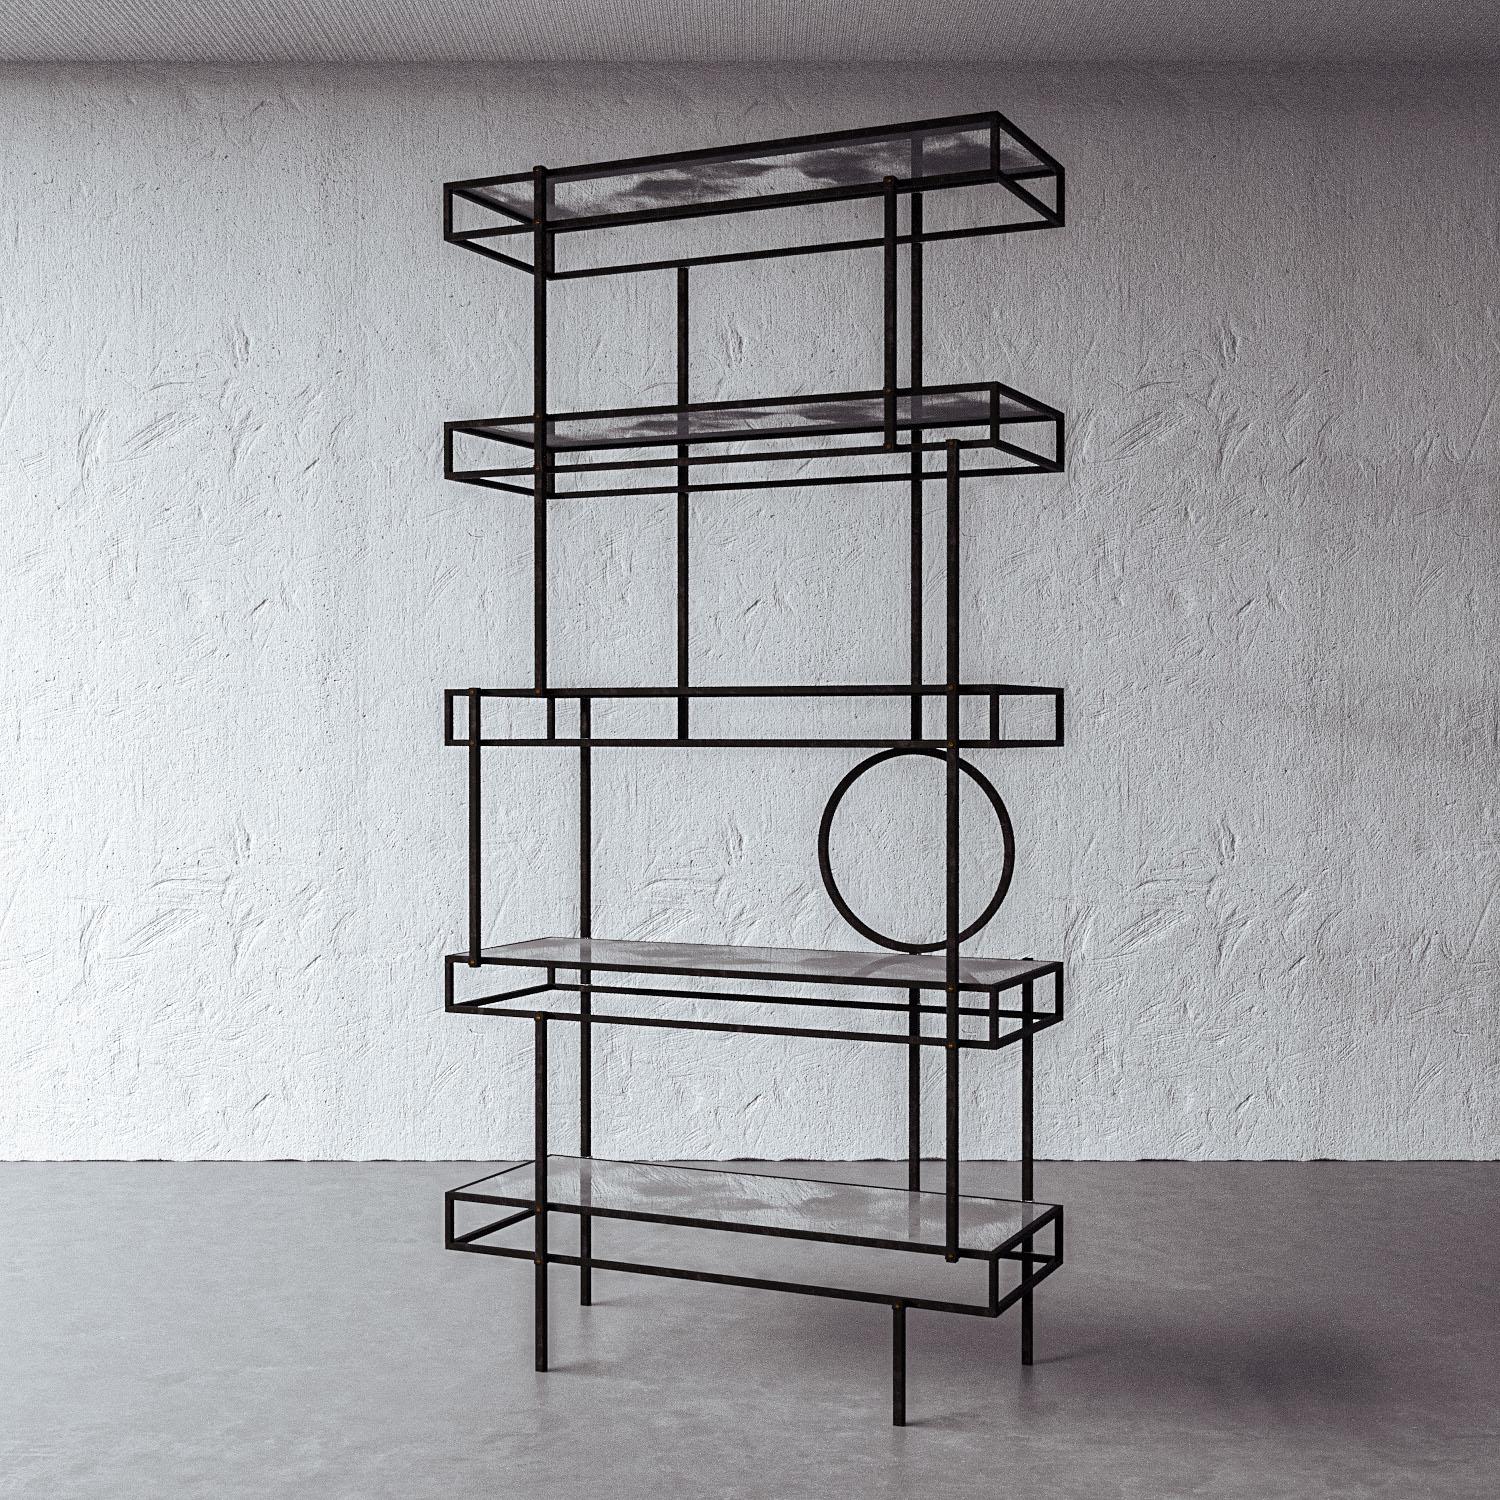 The open design of this etagere makes a beautiful storage option for art, books, and more. Antique bronze metal with brass accents references French design in the 1940s. Handmade by artisans in Vietnam, this Modular piece stands boldly on its own or